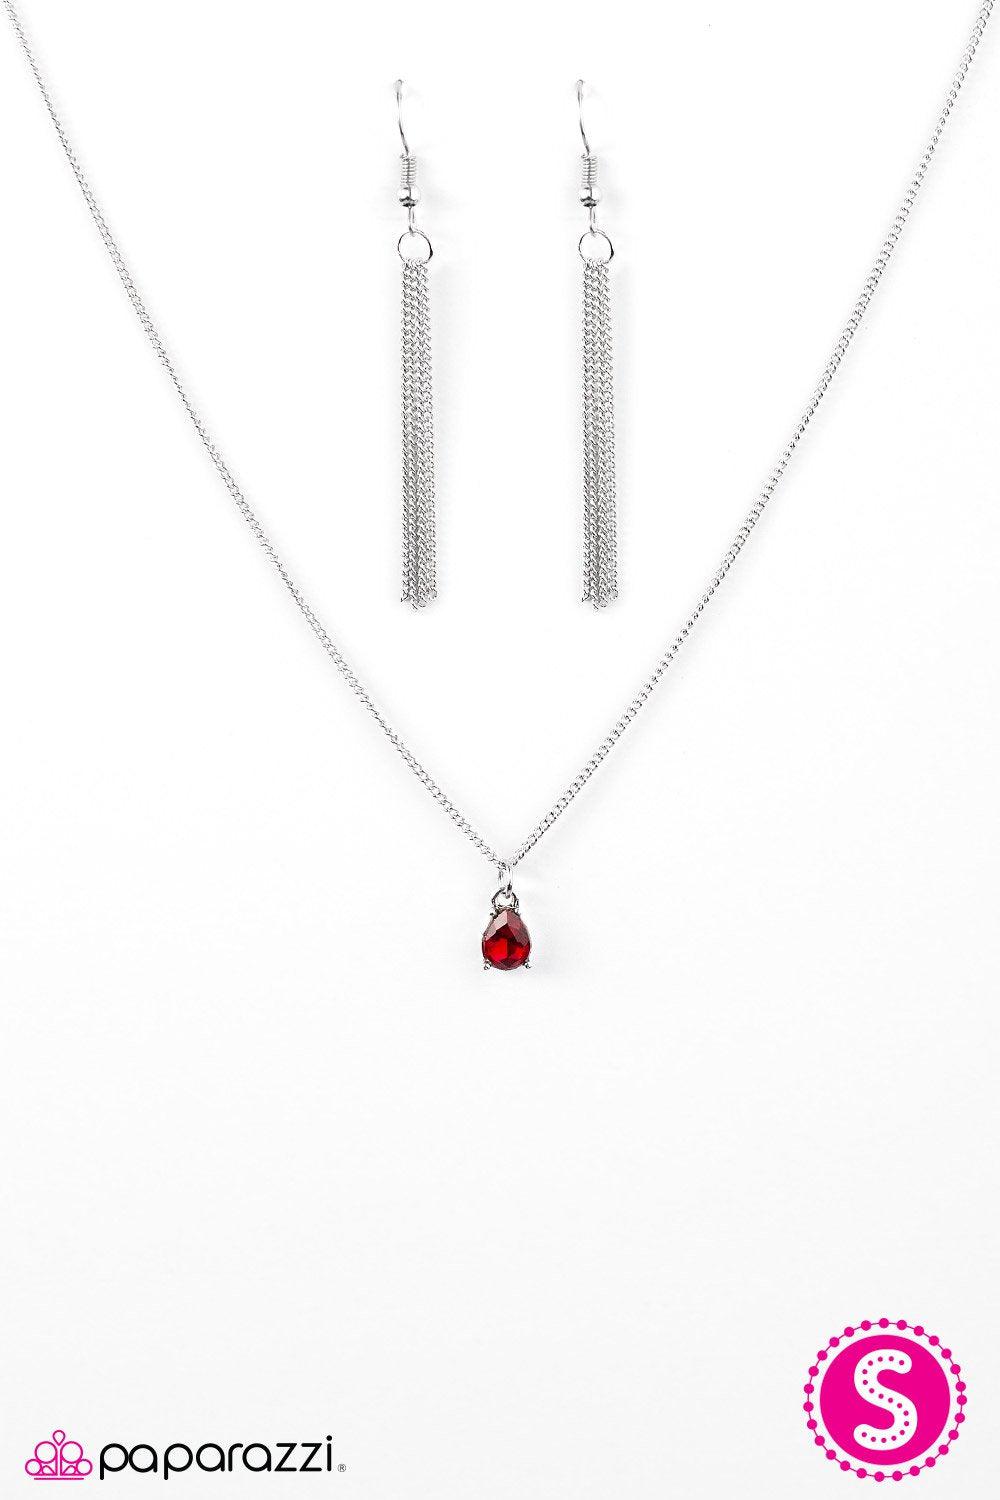 Stormy Nights Red Gem Necklace - Paparazzi Accessories-CarasShop.com - $5 Jewelry by Cara Jewels